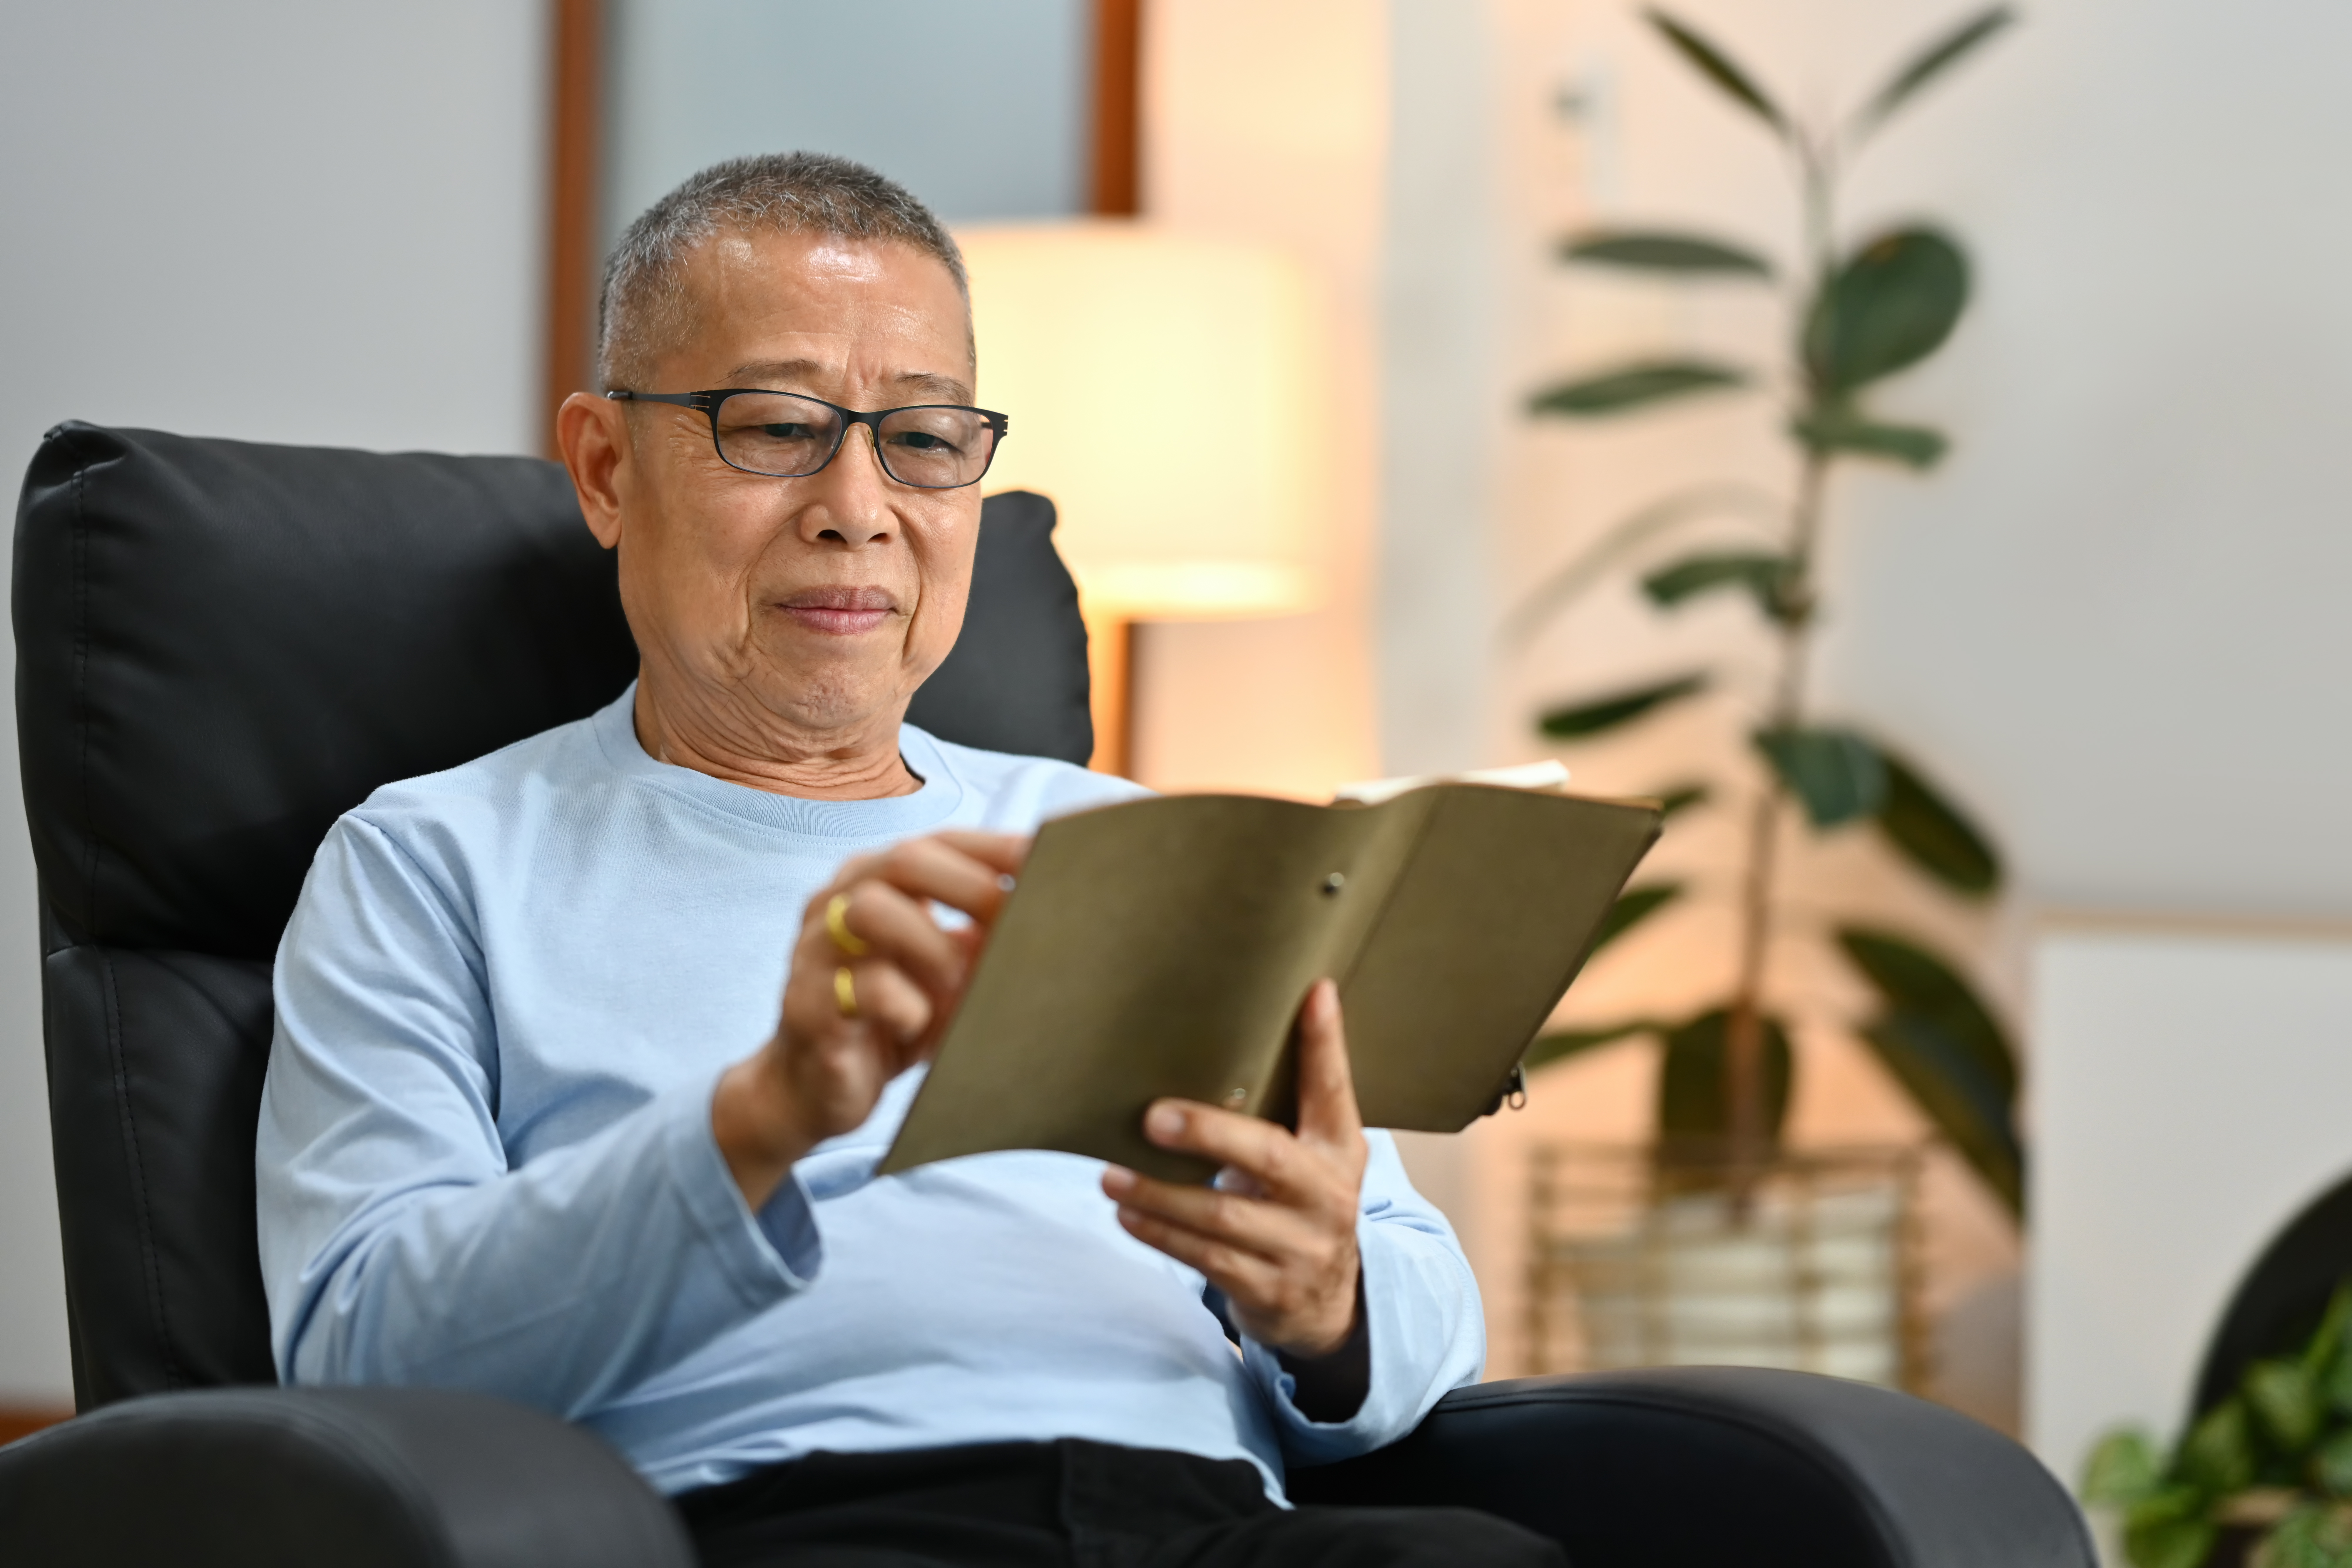 An older person wearing glassess skimming through book, finding calm in simple pleasures – a picture illustrating the blog about physical signs of stress in the older person.